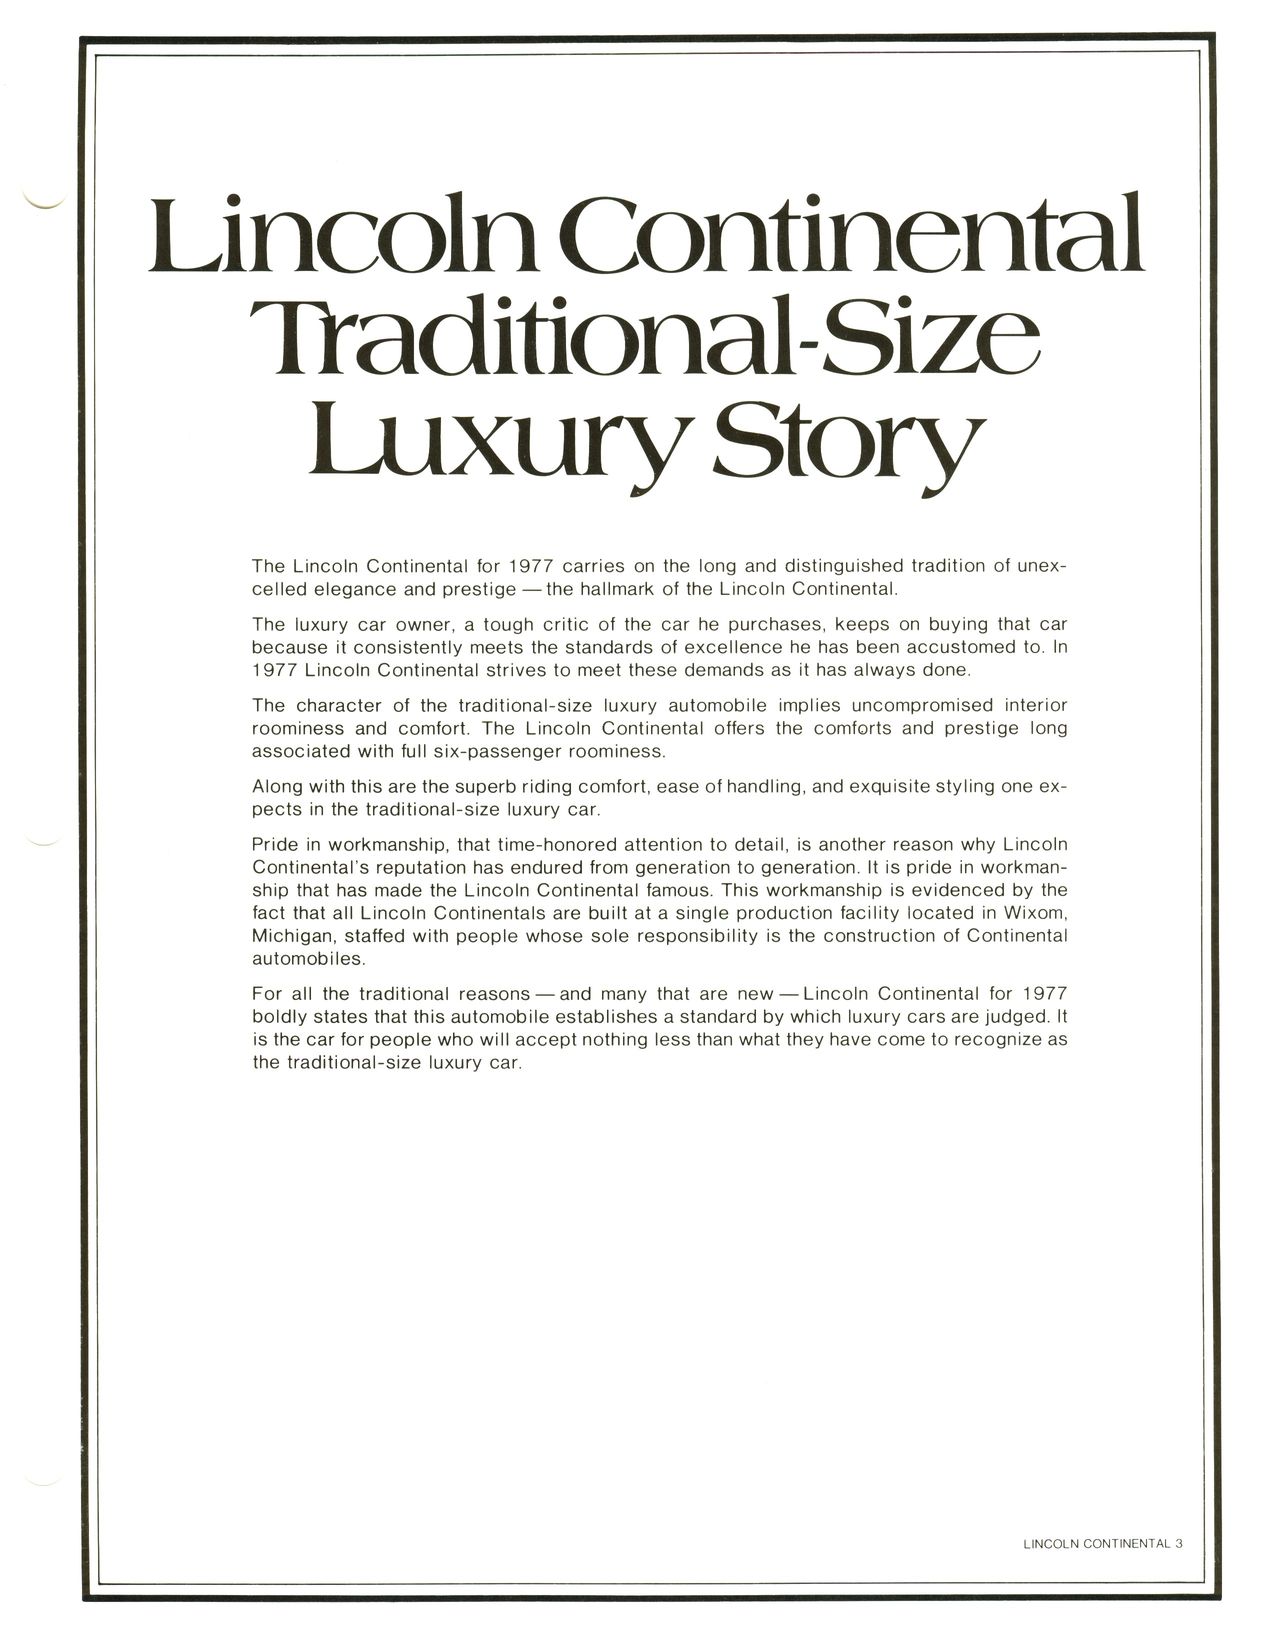 1977 Continental Product Facts Book-2-03